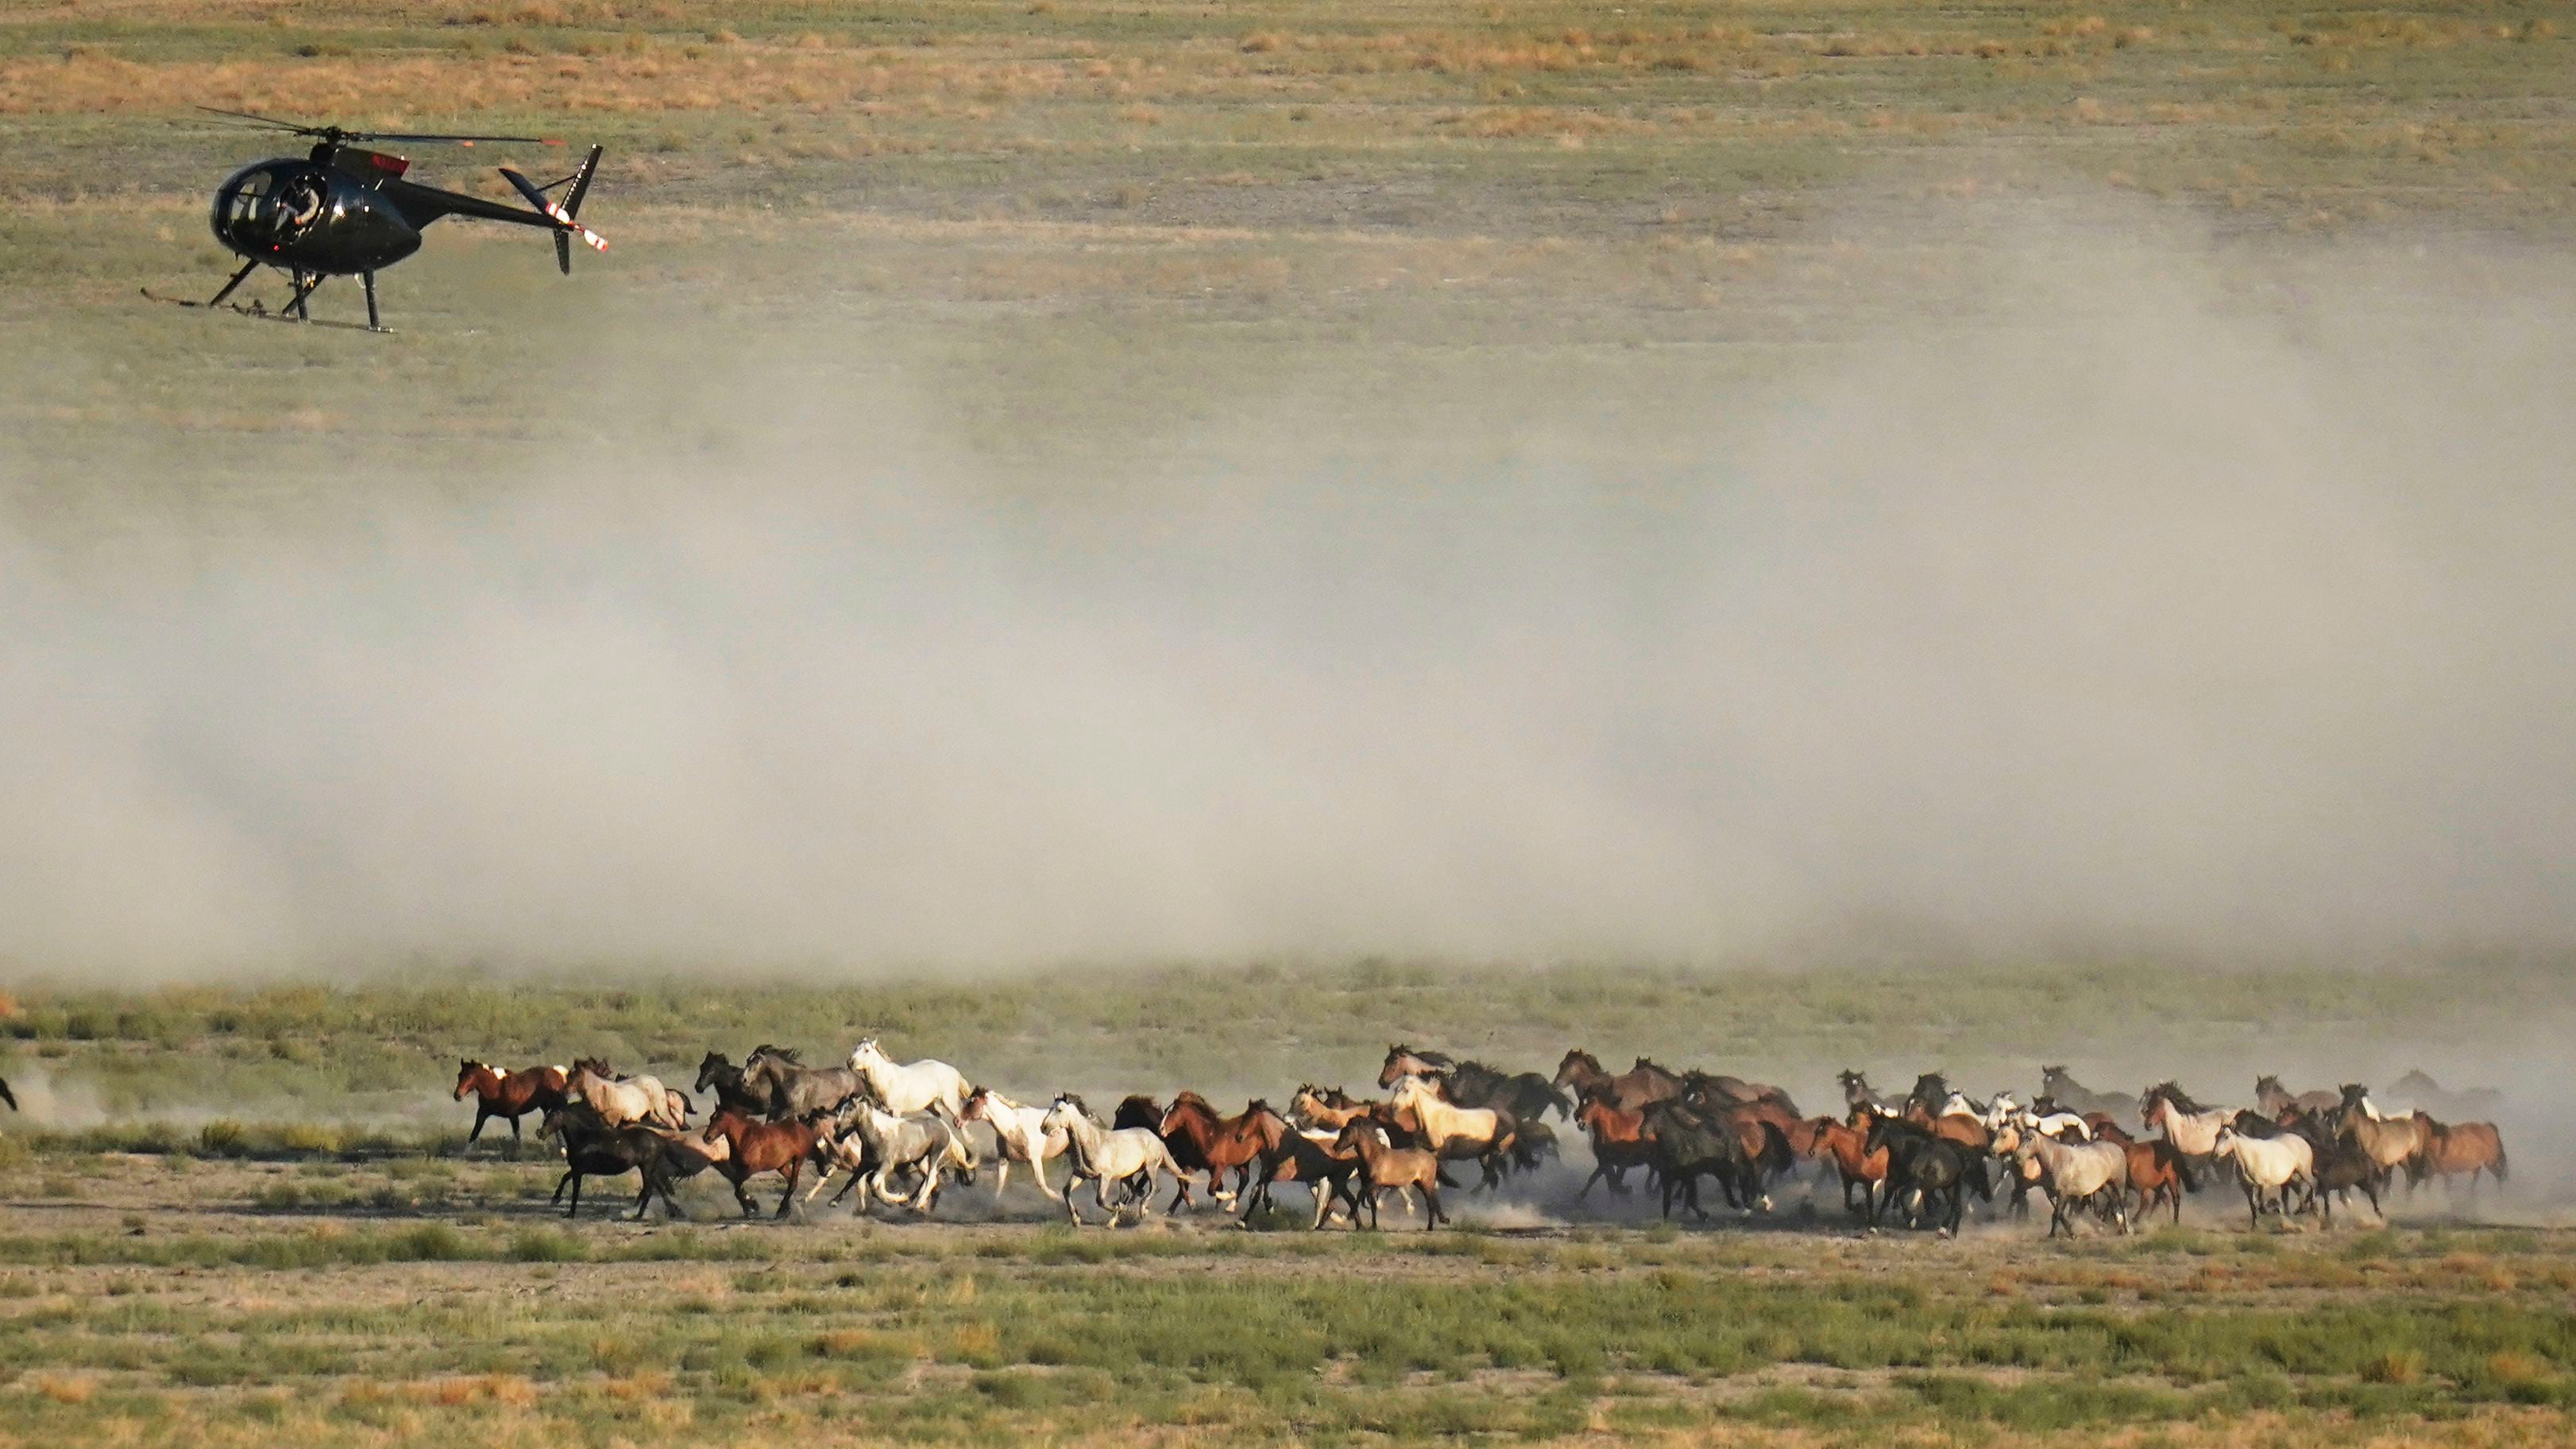 (Rick Bowmer | Associated Press) A helicopter pushes wild horses during a roundup on July 16, 2021, near U.S. Army Dugway Proving Ground, Utah. 